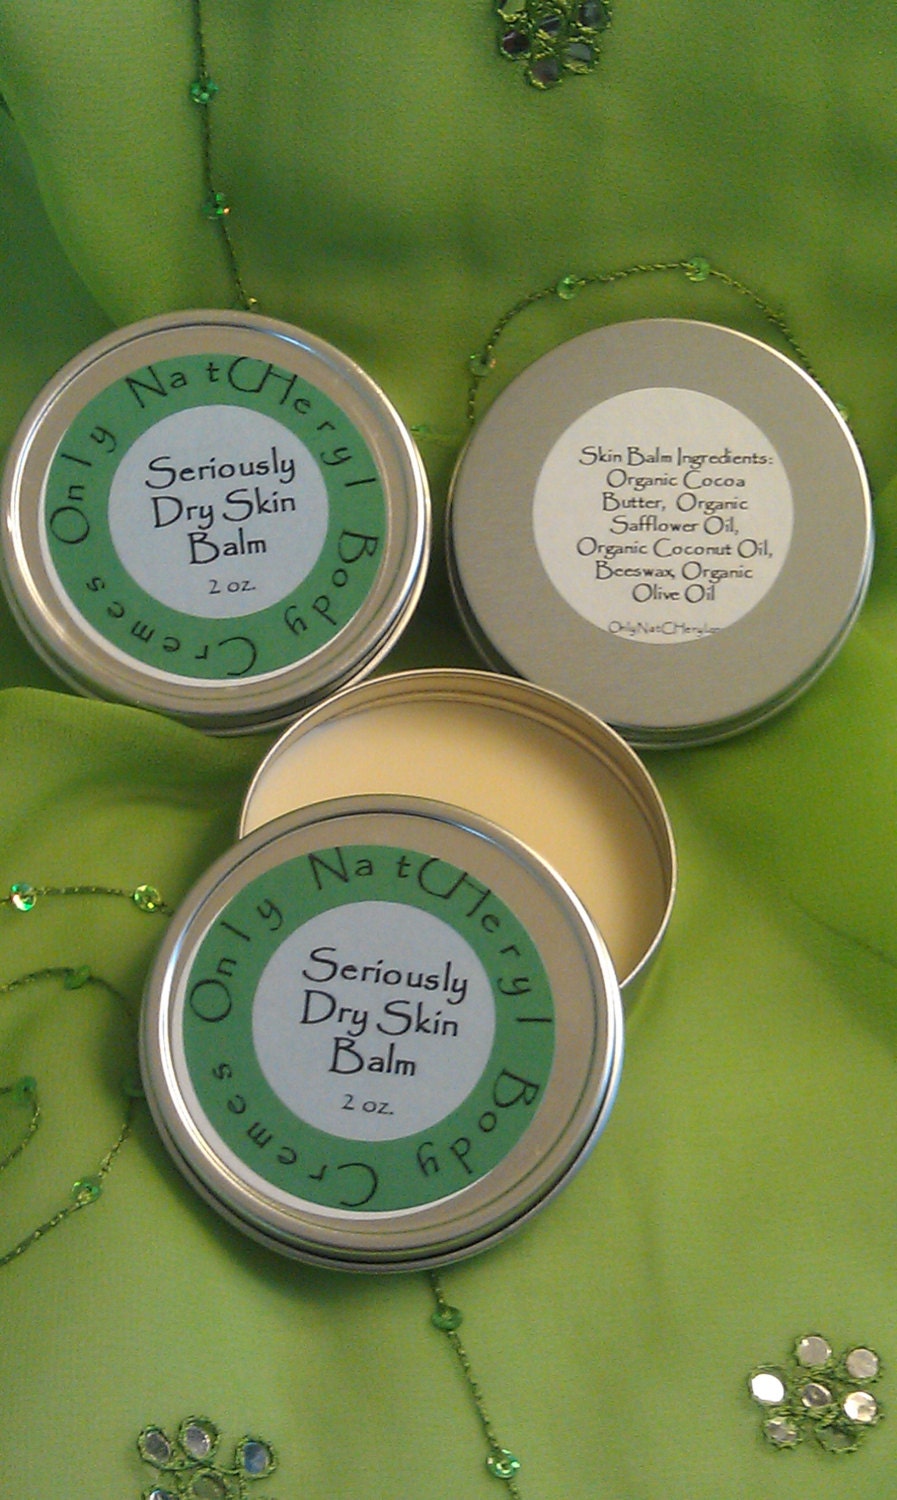 Seriously Dry Skin Balm made with Organic Oils, 2 oz.